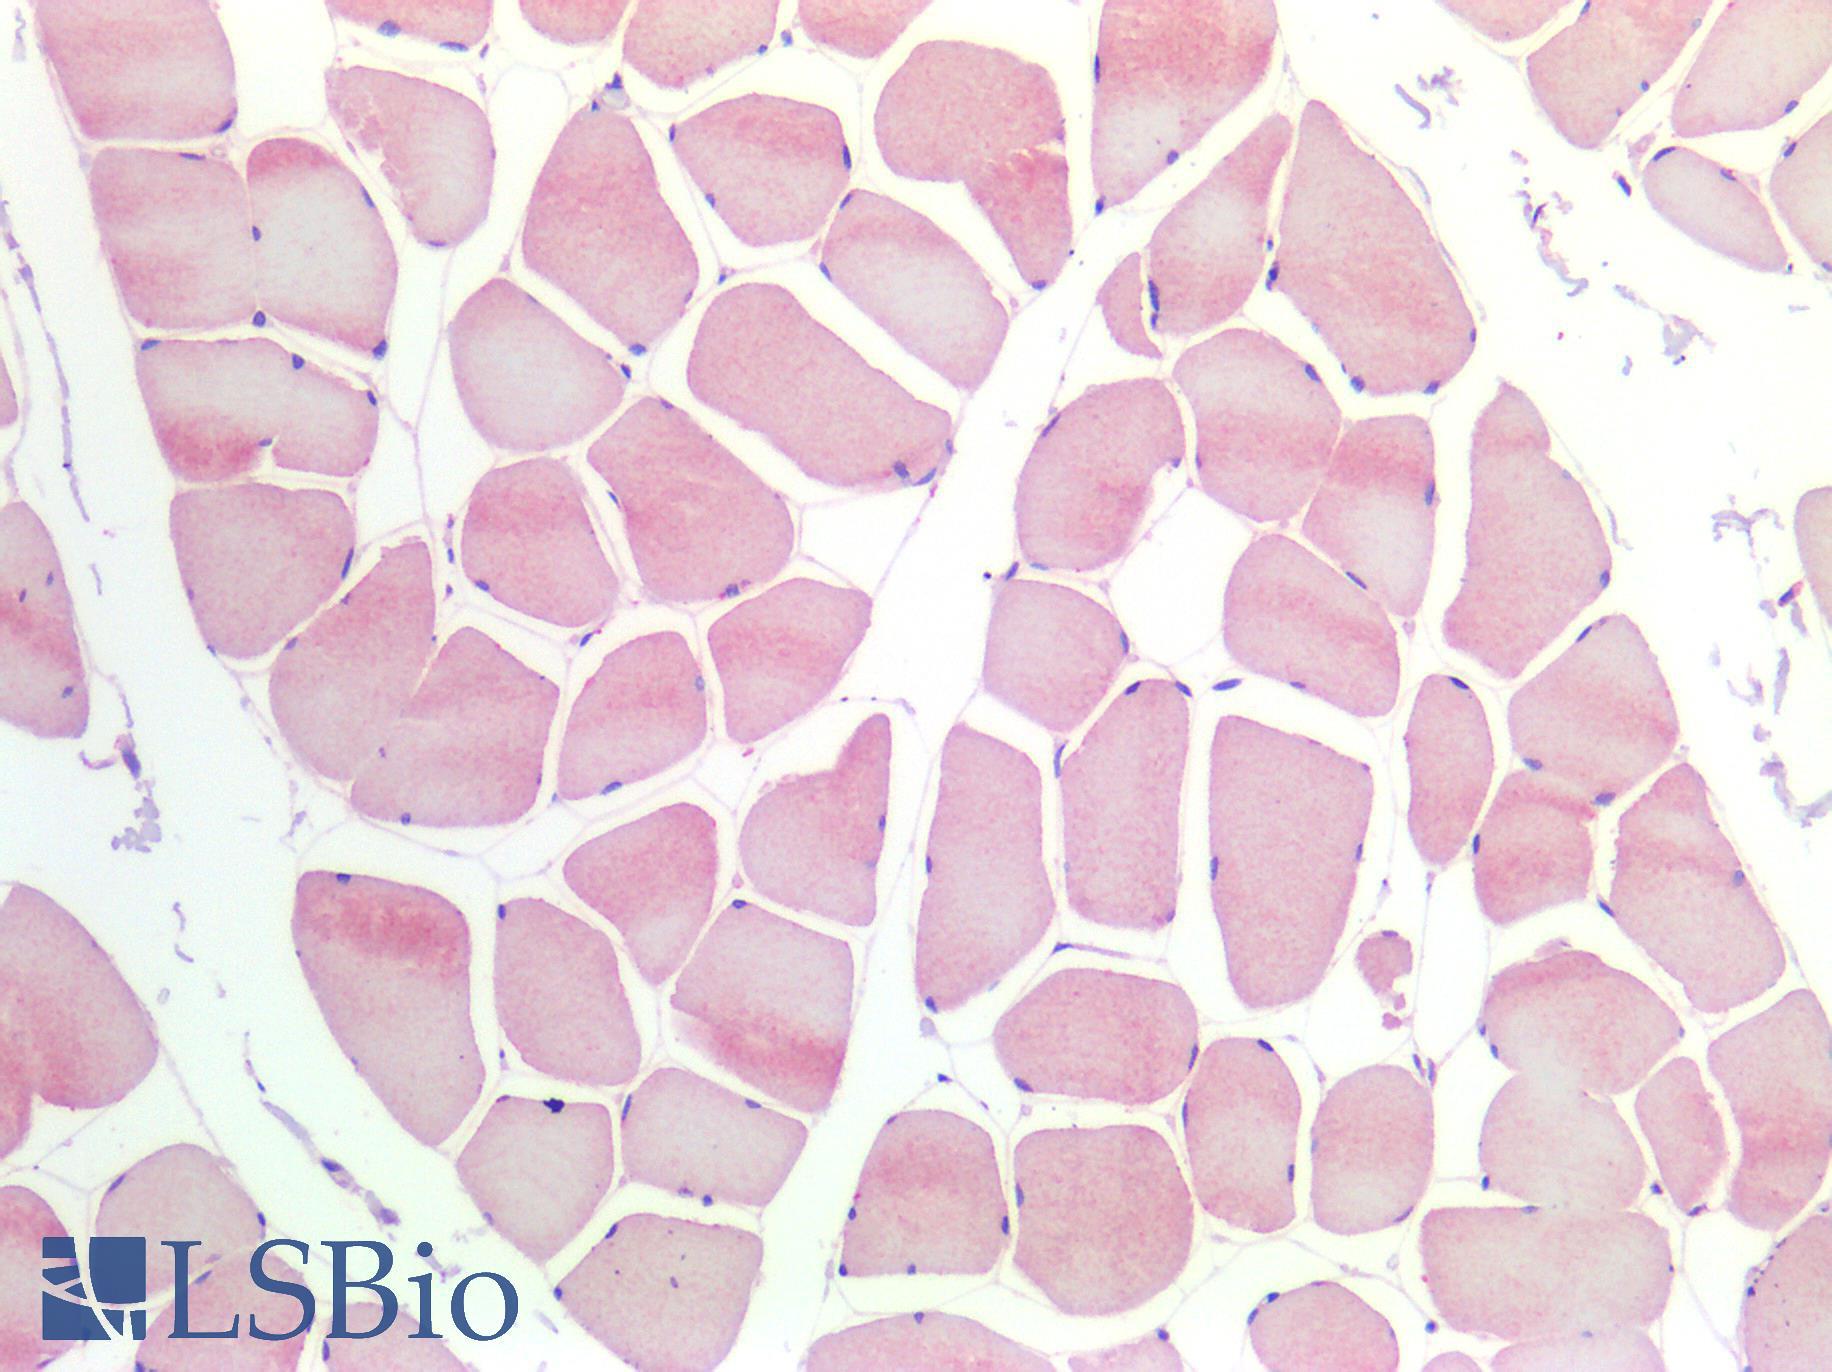 ACHE / Acetylcholinesterase Antibody - Human Skeletal Muscle: Formalin-Fixed, Paraffin-Embedded (FFPE)